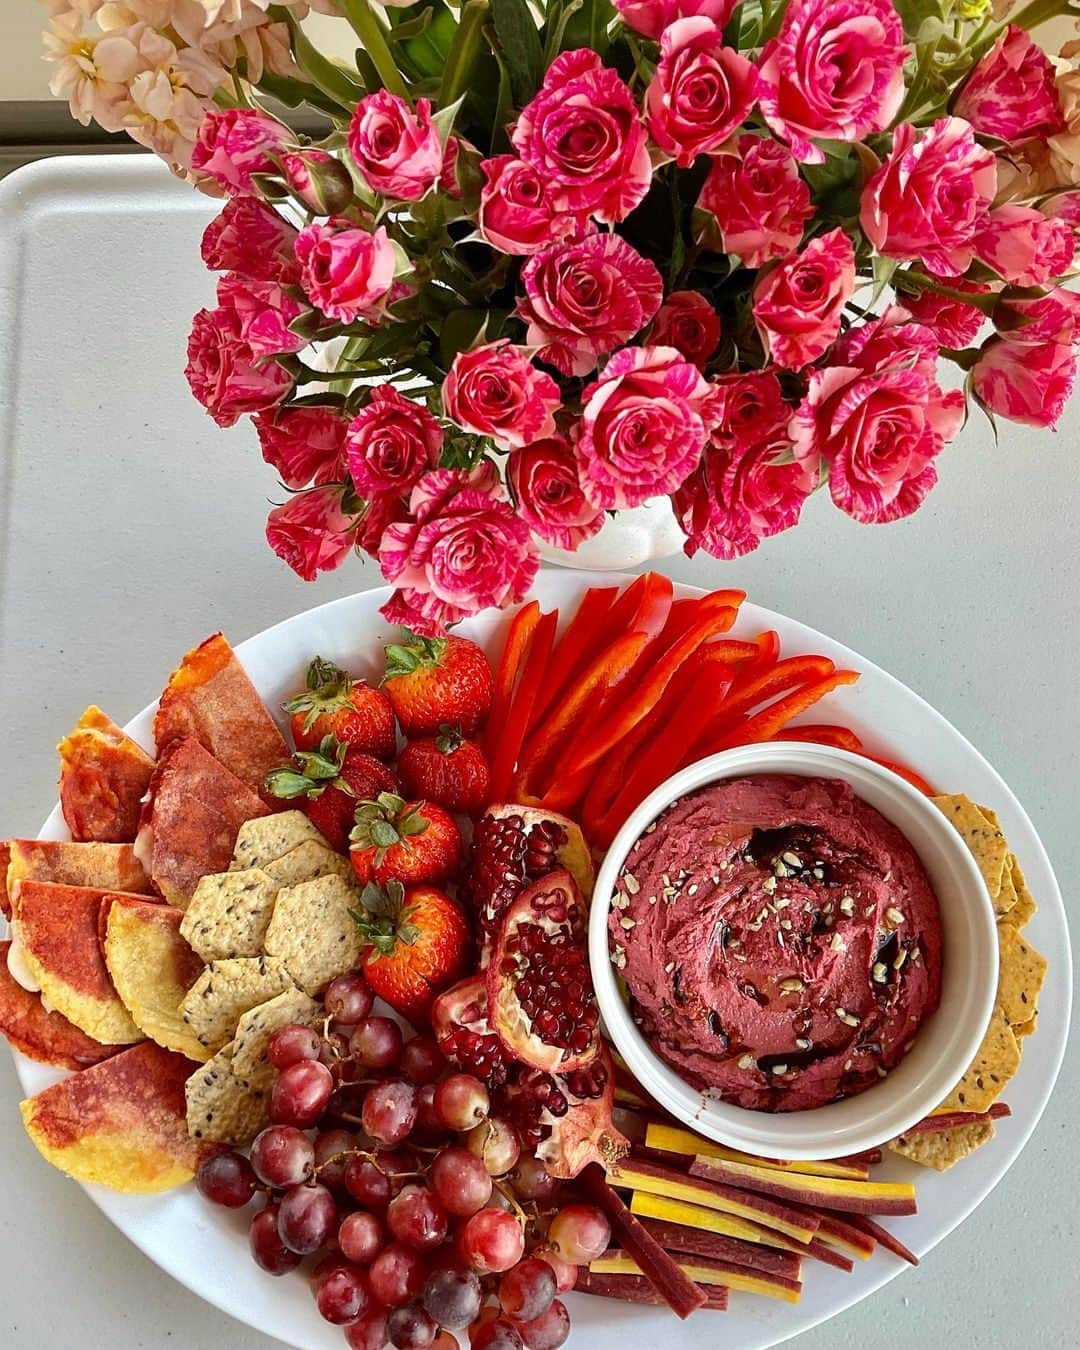 Vitamix Global Headquarters Real foodのインスタグラム：「This beet hummus radiates the perfect after school snack for the fall time - thanks @sarahlee.chowing for this beautifully delicious recipe!   Full recipe: To Dip: - Gochujang tortilla quesadillas - Quinoa crackers - Red grapes - Strawberries - Bell peppers - Pomegranate - Purple carrots  Beet powder hummus: - 1 can chickpeas, drained and rinsed - 3 Tbsp EVOO - 2 Tbsp lemon juice - 2 tsp minced garlic - 2 tsp beetroot powder - 1 tsp cumin - 1/4 cup tahini - 1/2 tsp sea salt - 4 large ice cubes  #vitamix #myvitamix #fallrecipe #UGC」